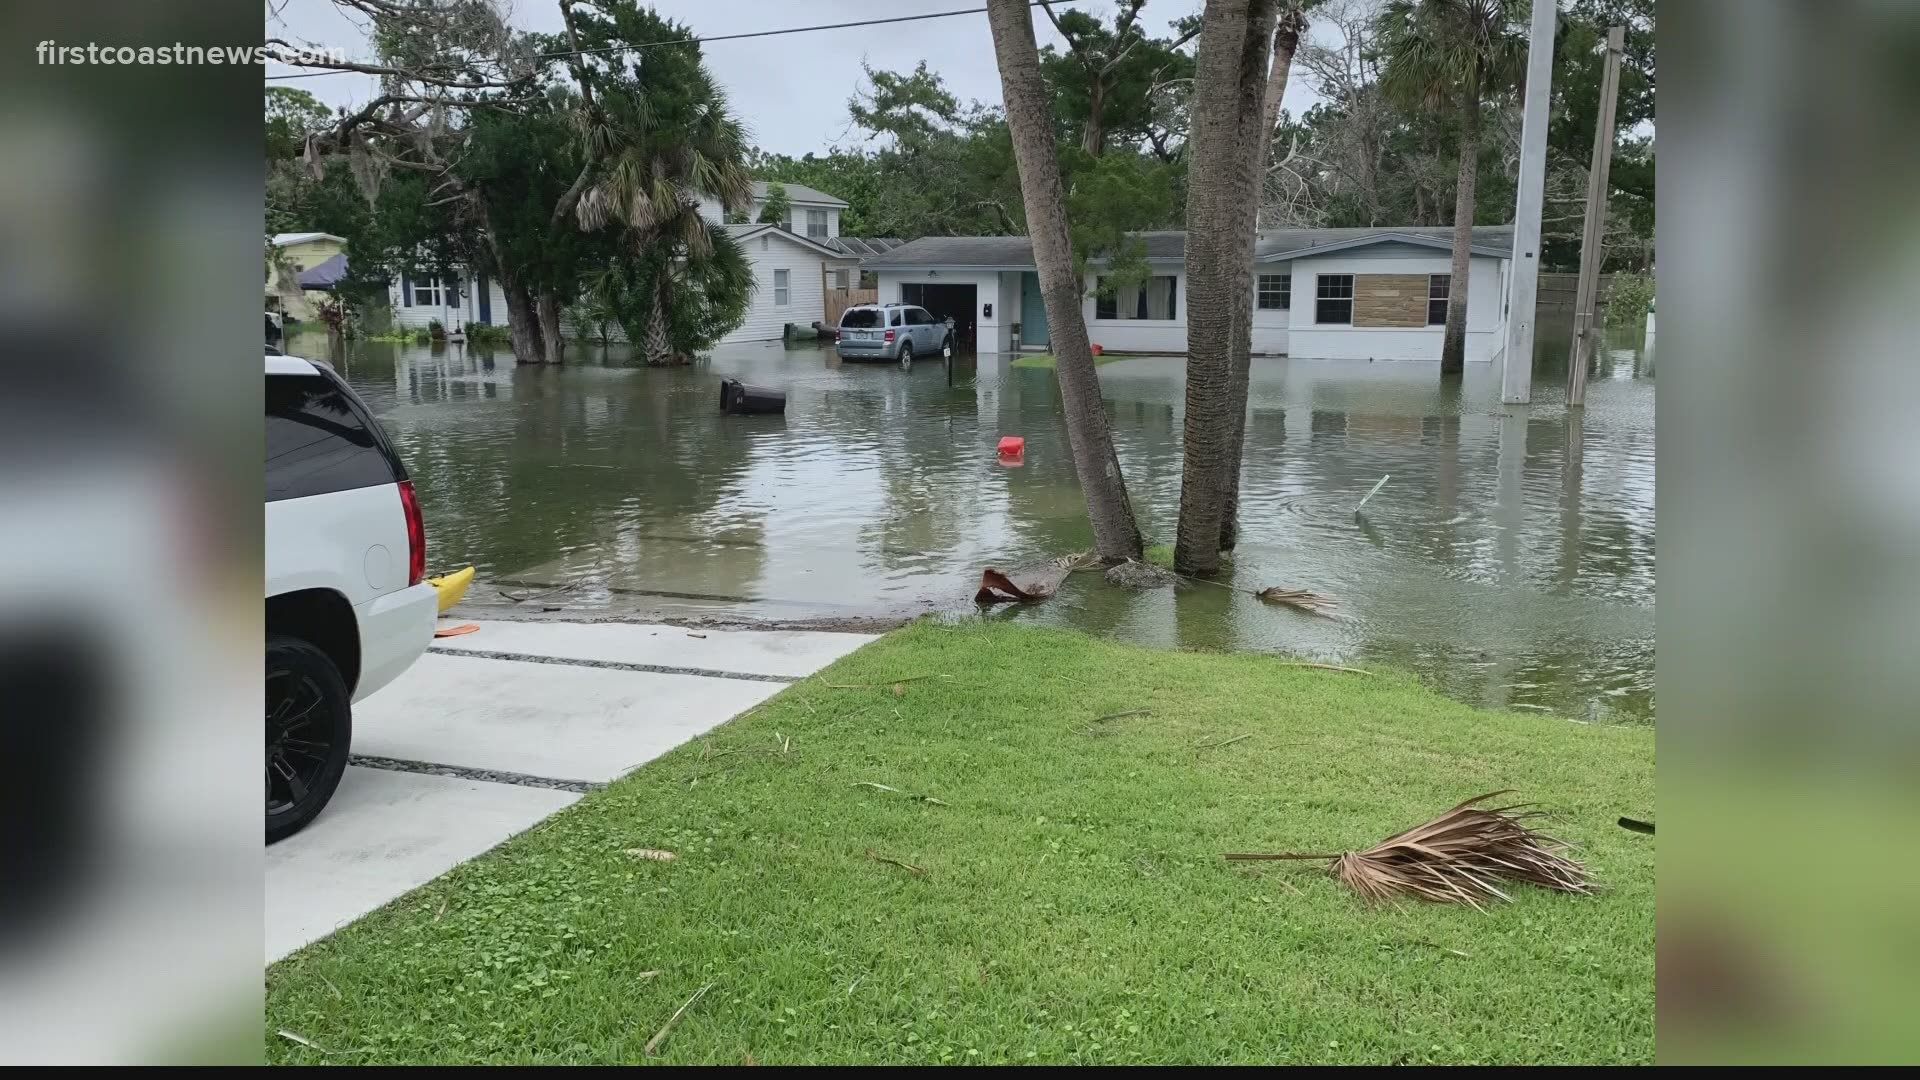 "We are trying to get in front of the rainy-day flooding that happens when there's really no hurricane or storm event," one of the plan's creators said.